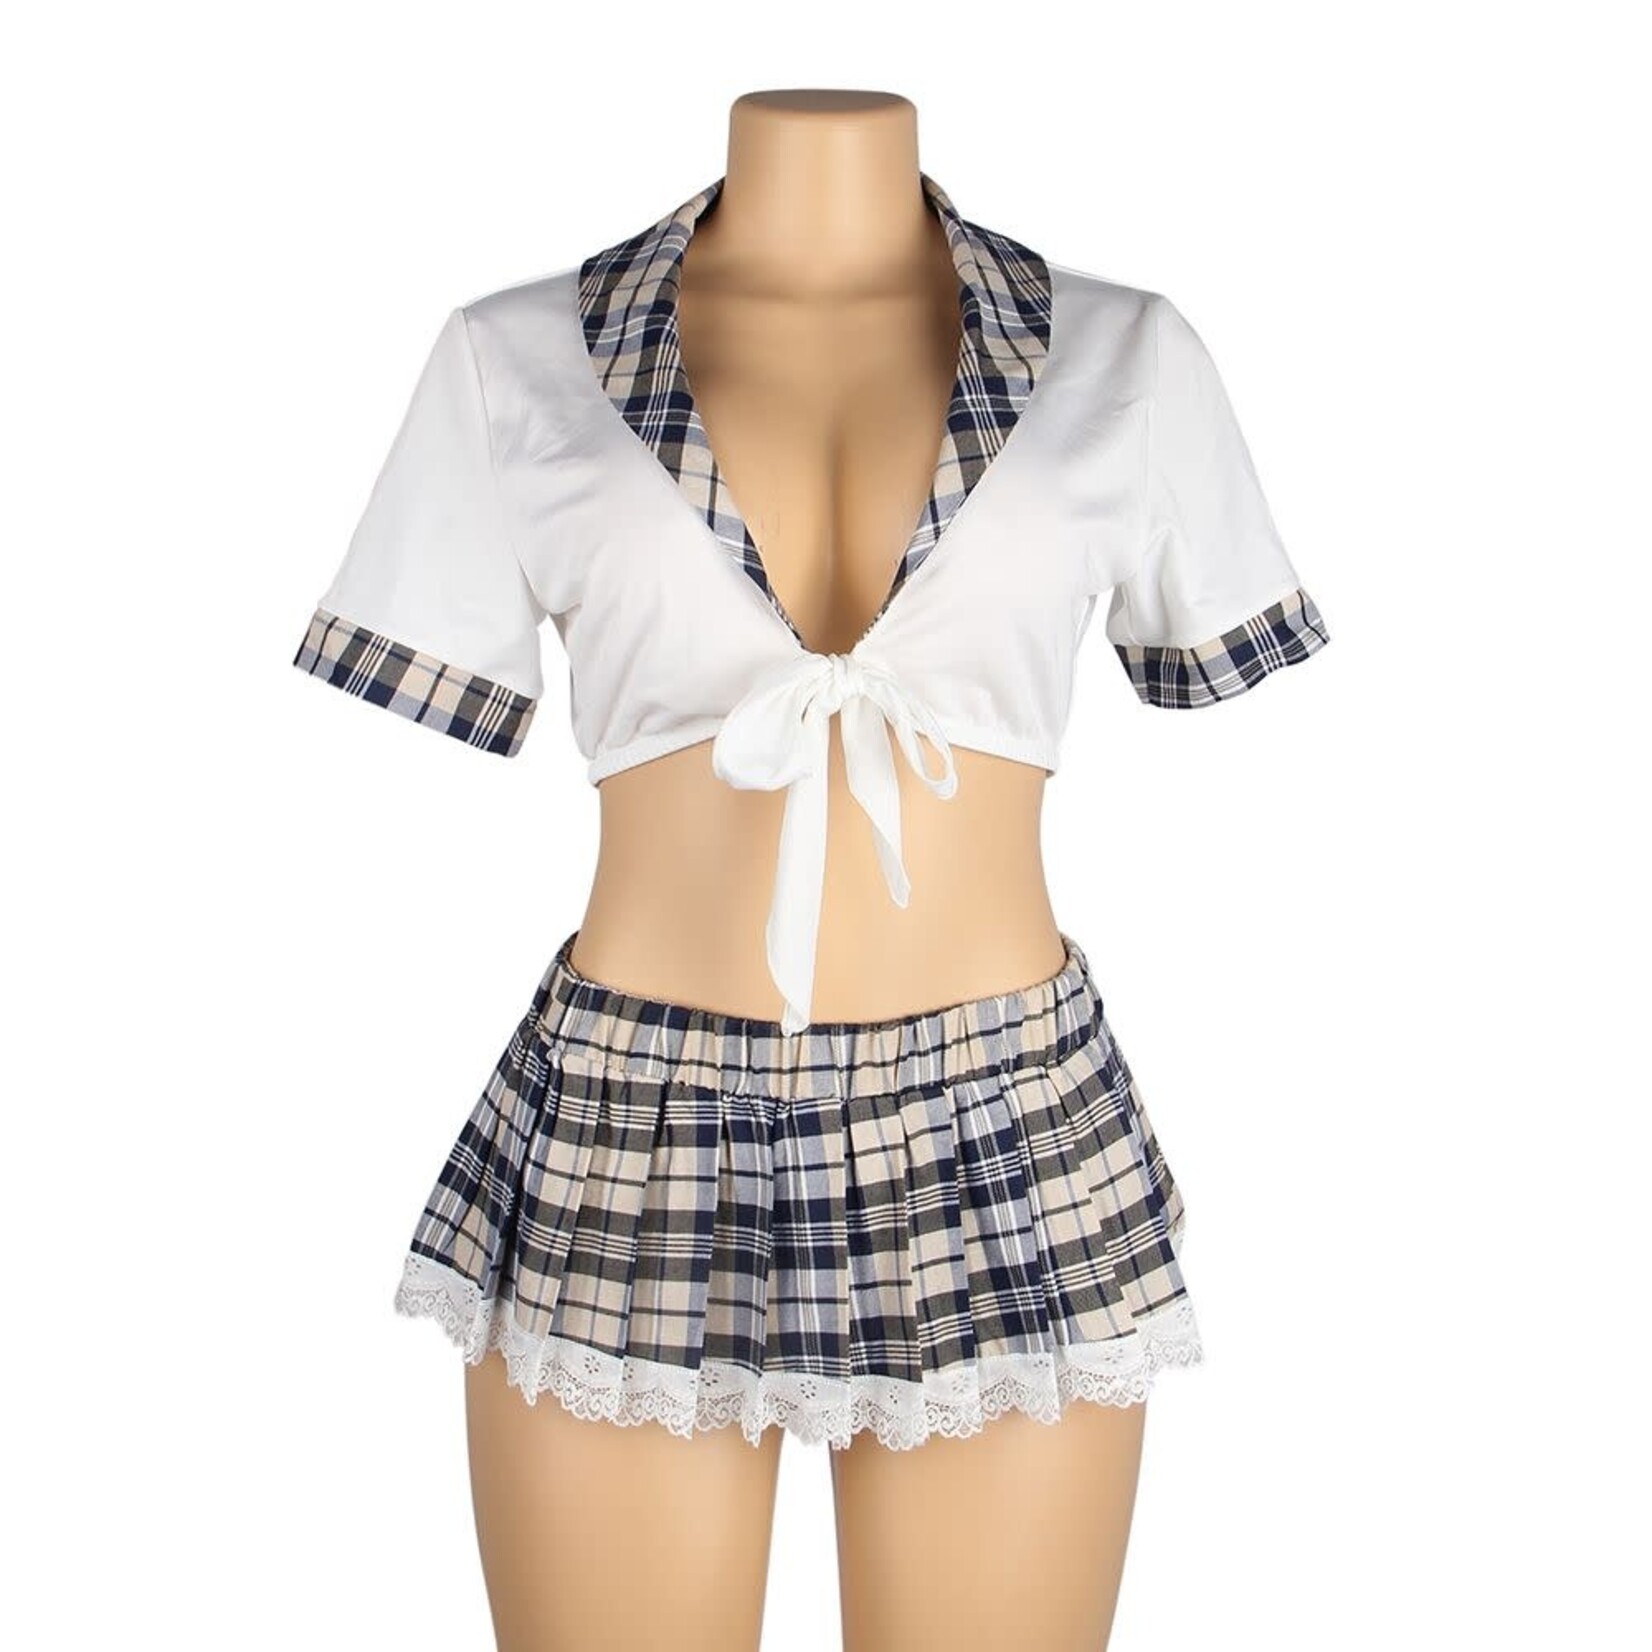 OH YEAH! -  SEXY WHITE CROP TOP PLAID SKIRT COSPLAY SUIT UNIFORM XL-2XL